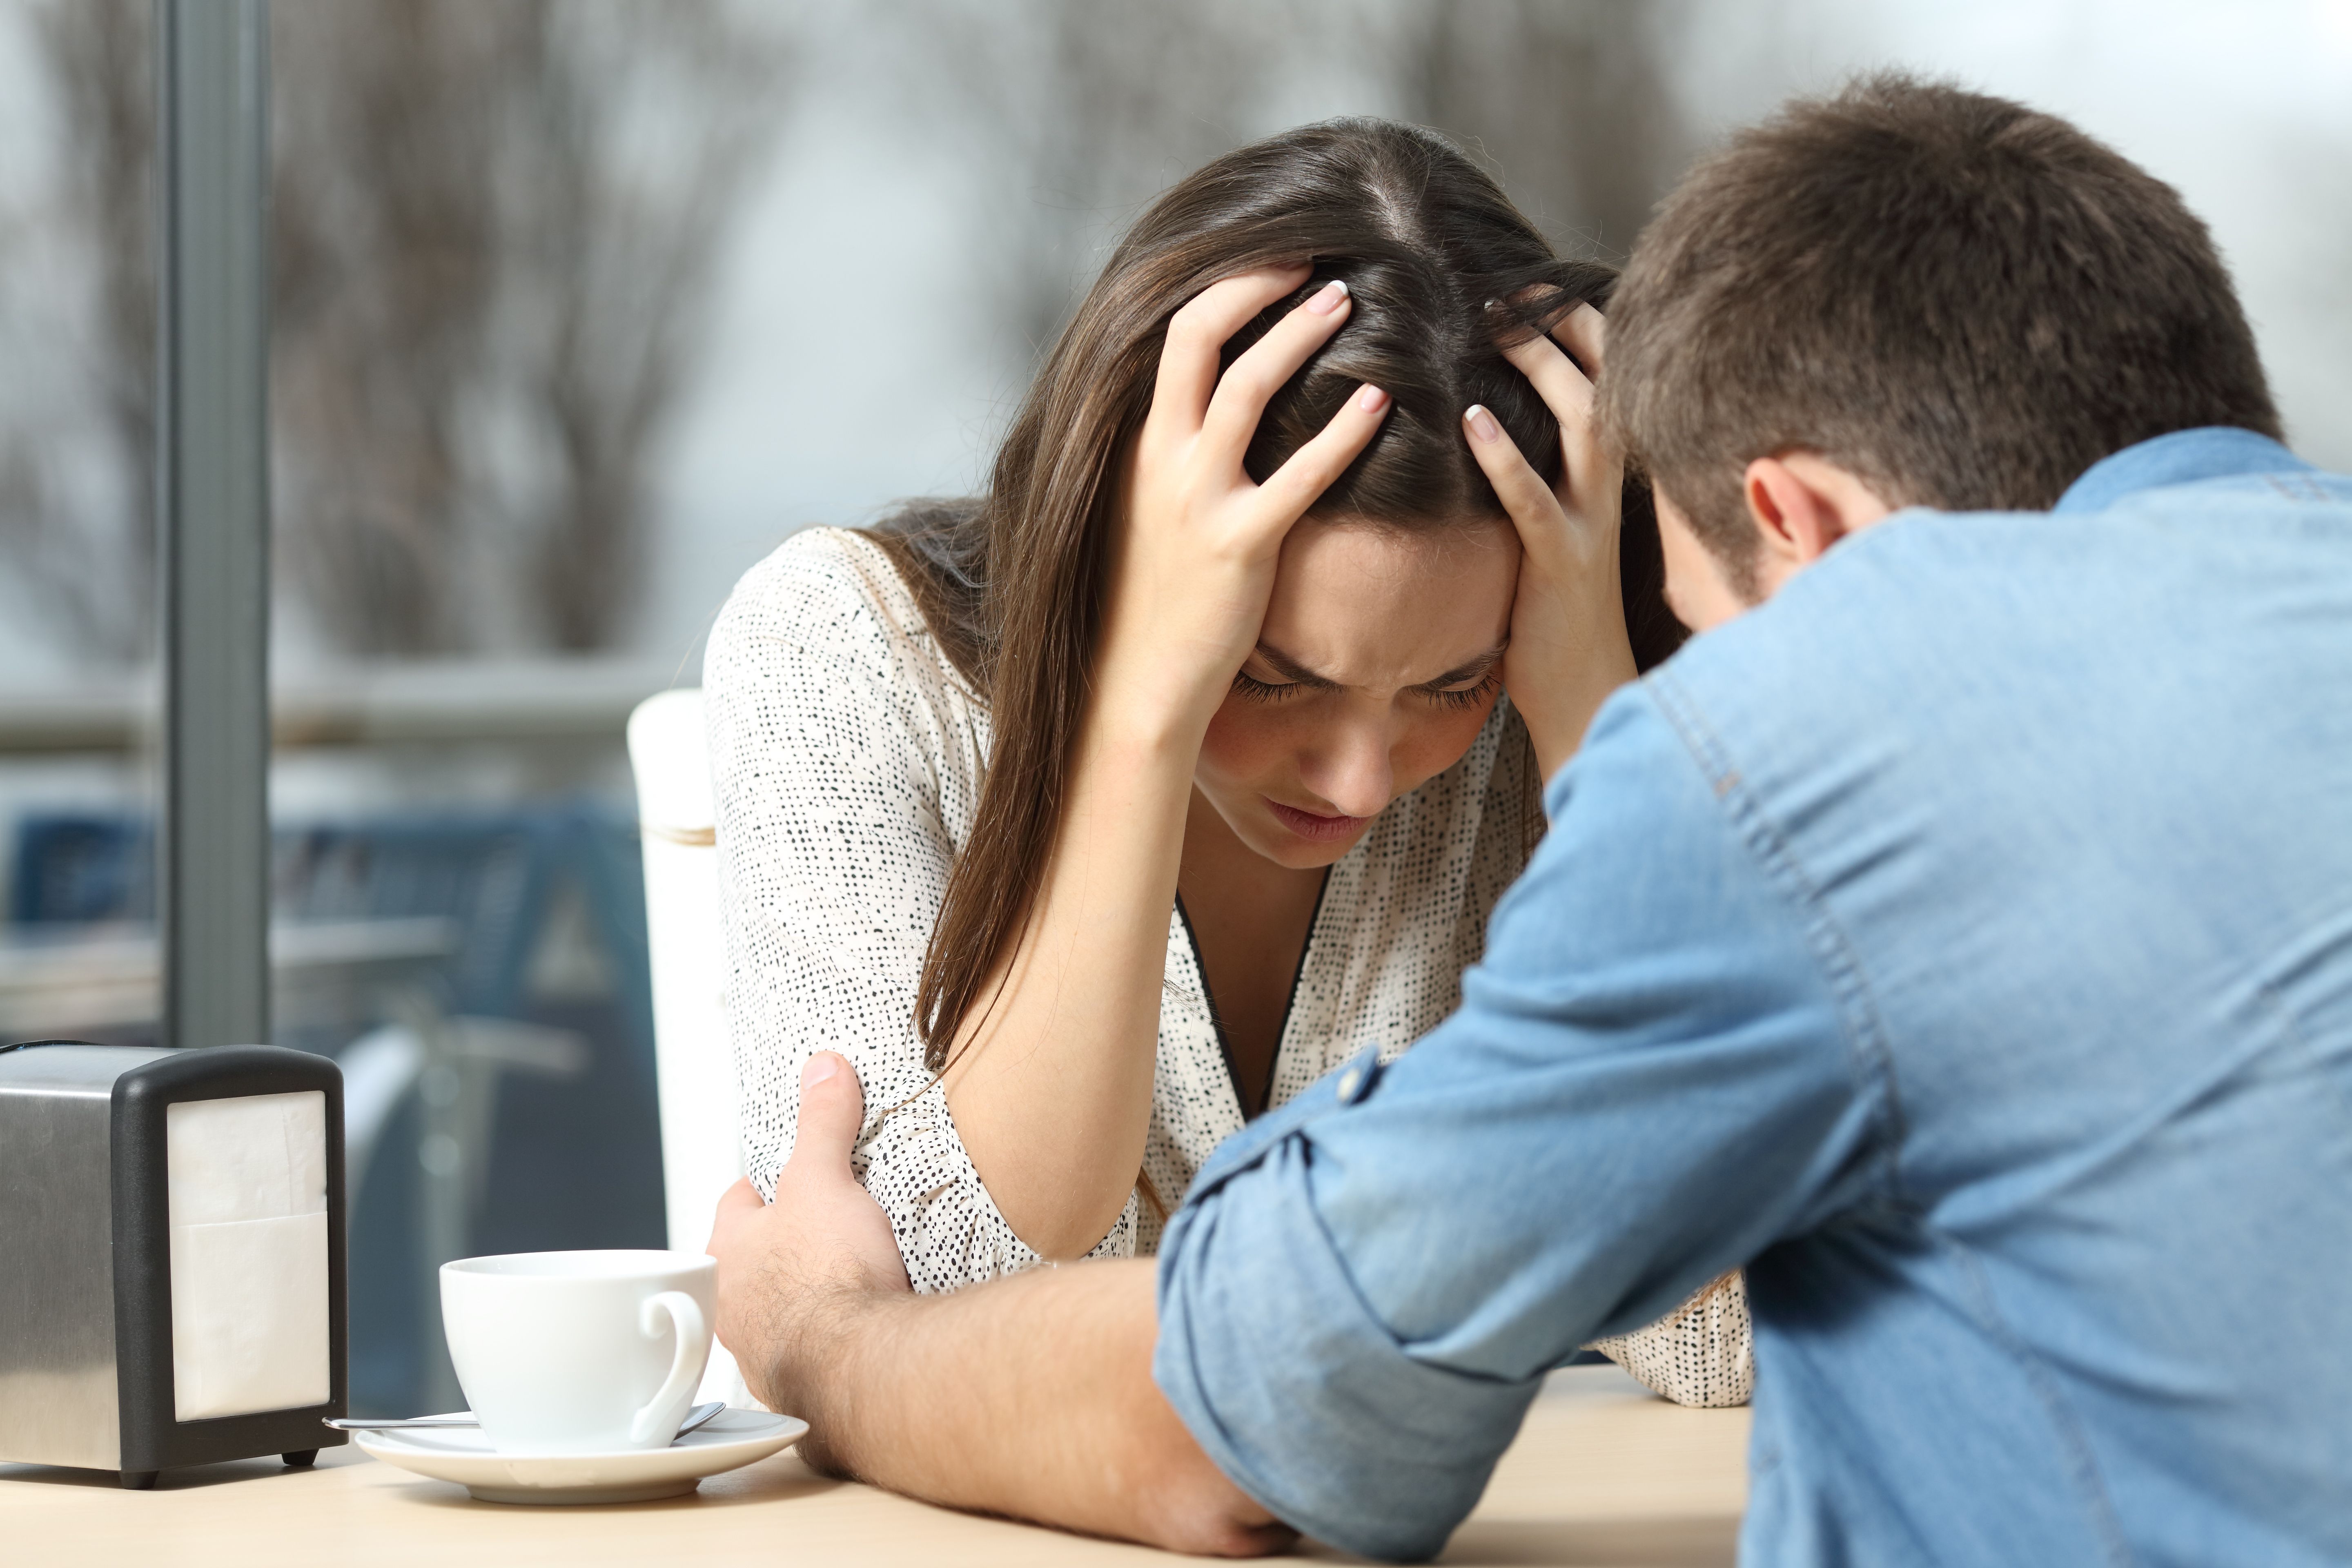 A man and a woman talking while upset. | Source: Shutterstock